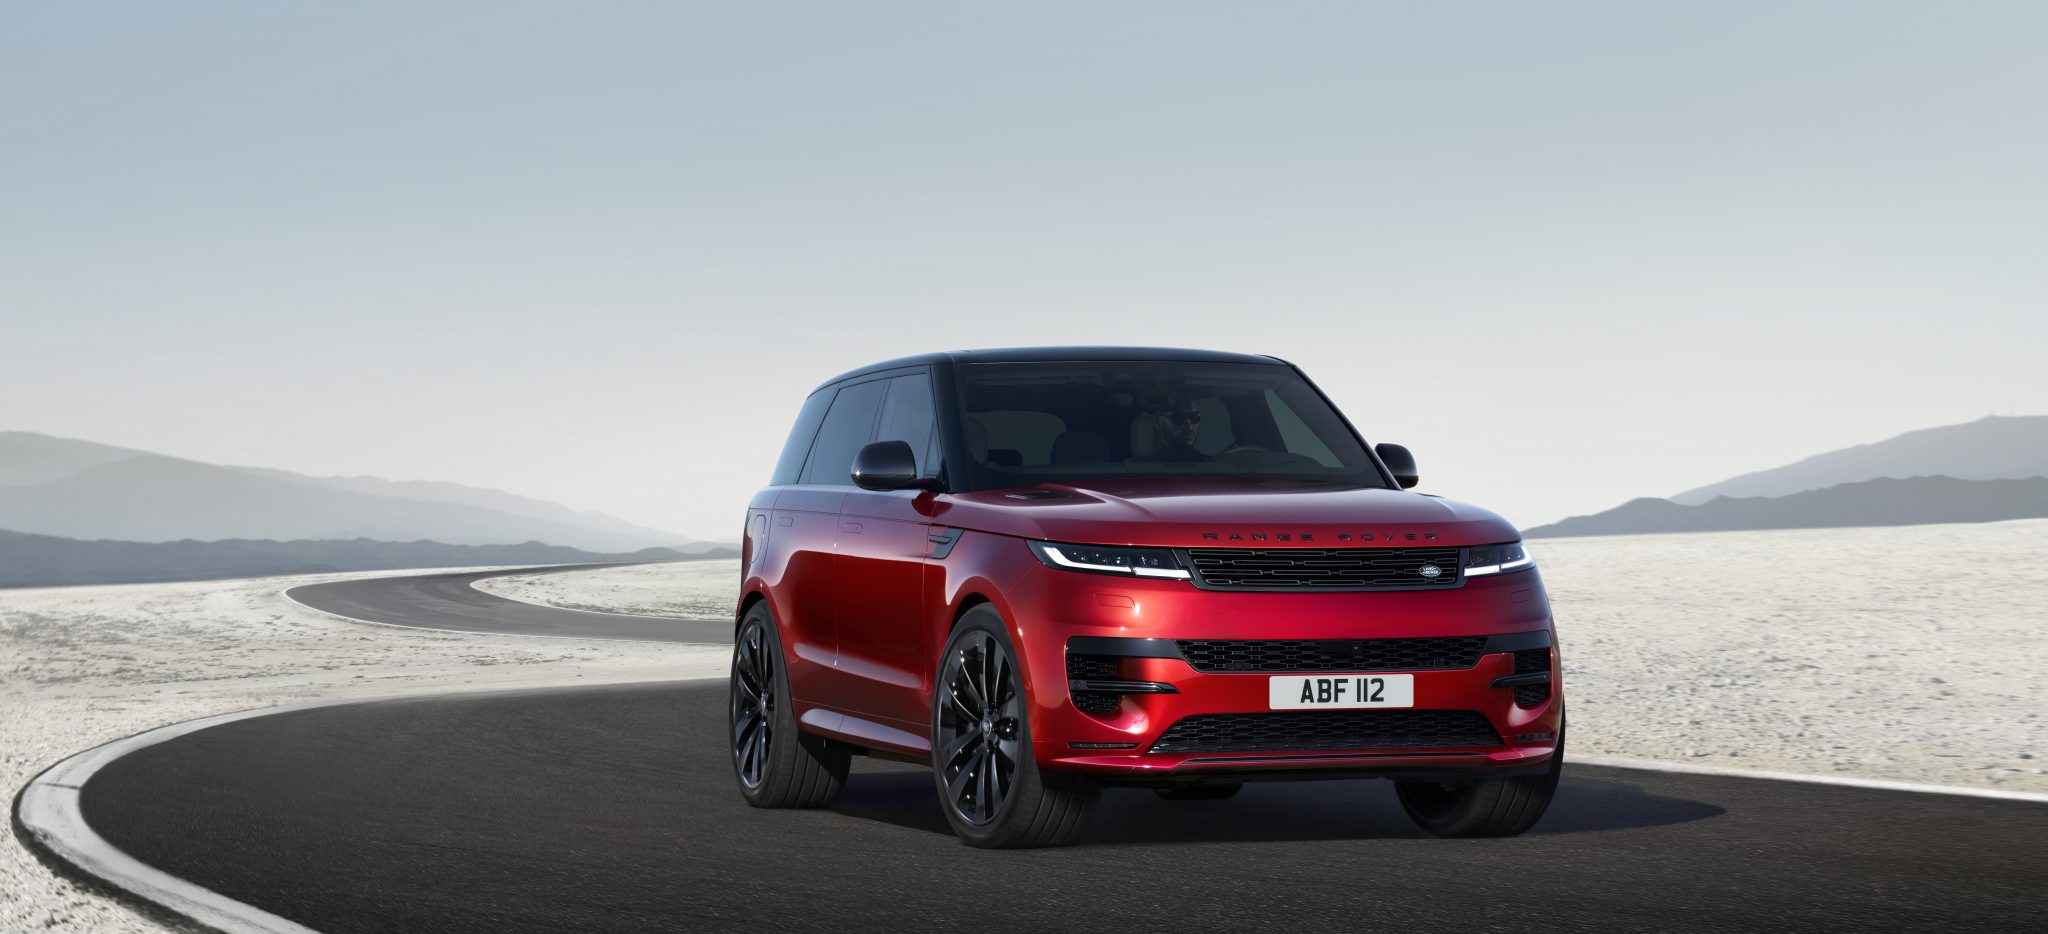 New Range Rover Sport debuts with allelectric version to follow in